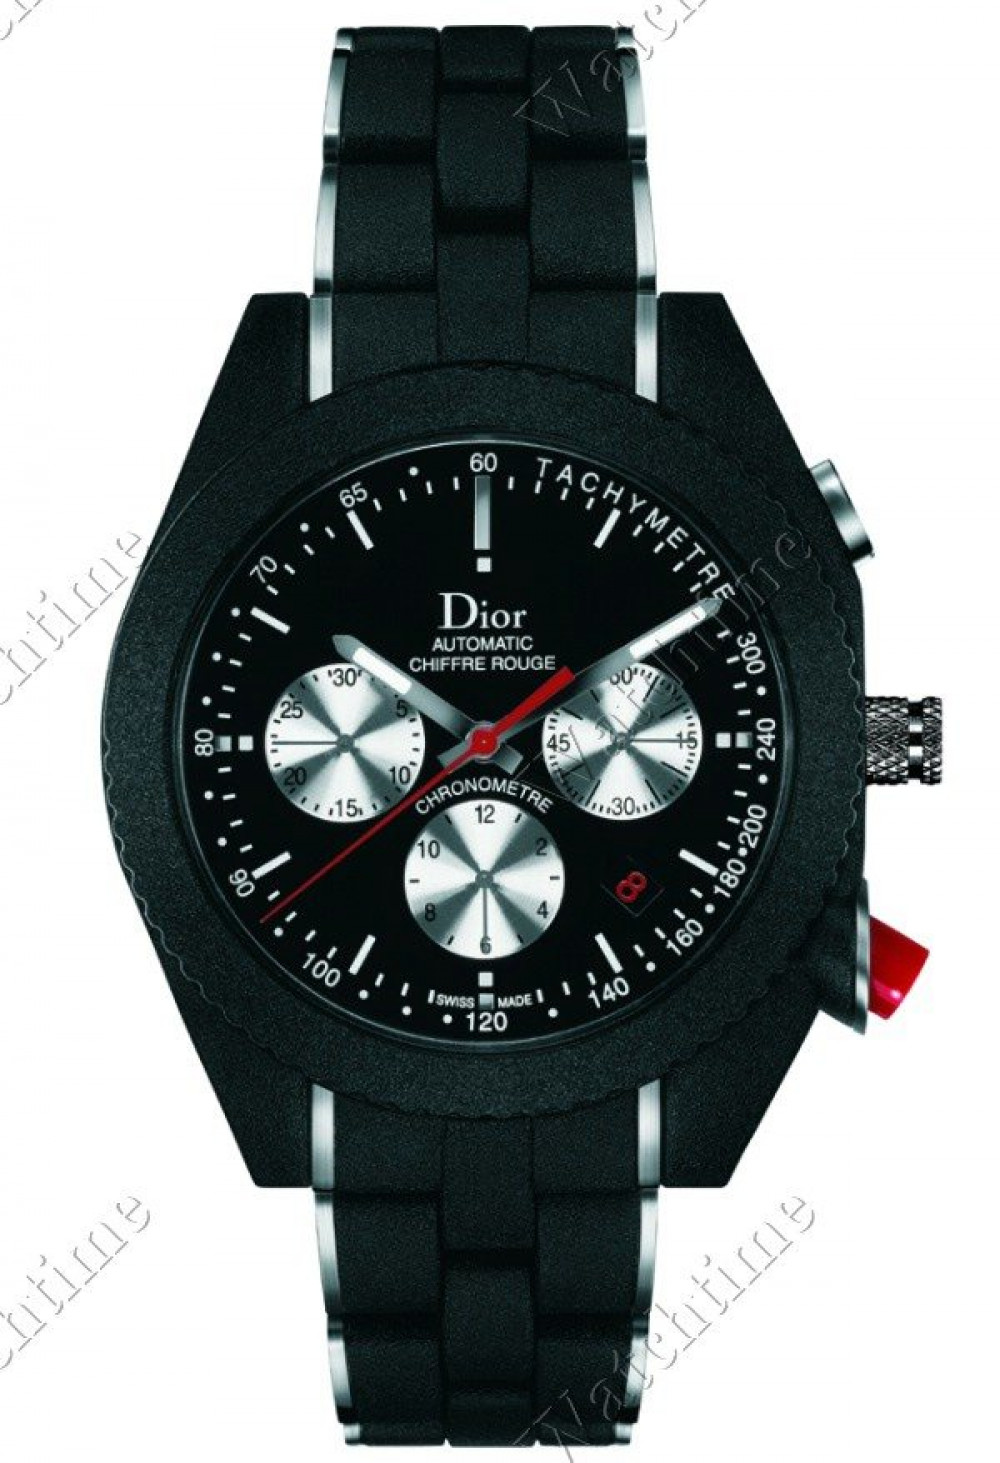 Zegarek firmy Dior, model Chiffre Rouge A05 Black Time Automatic Chronograph